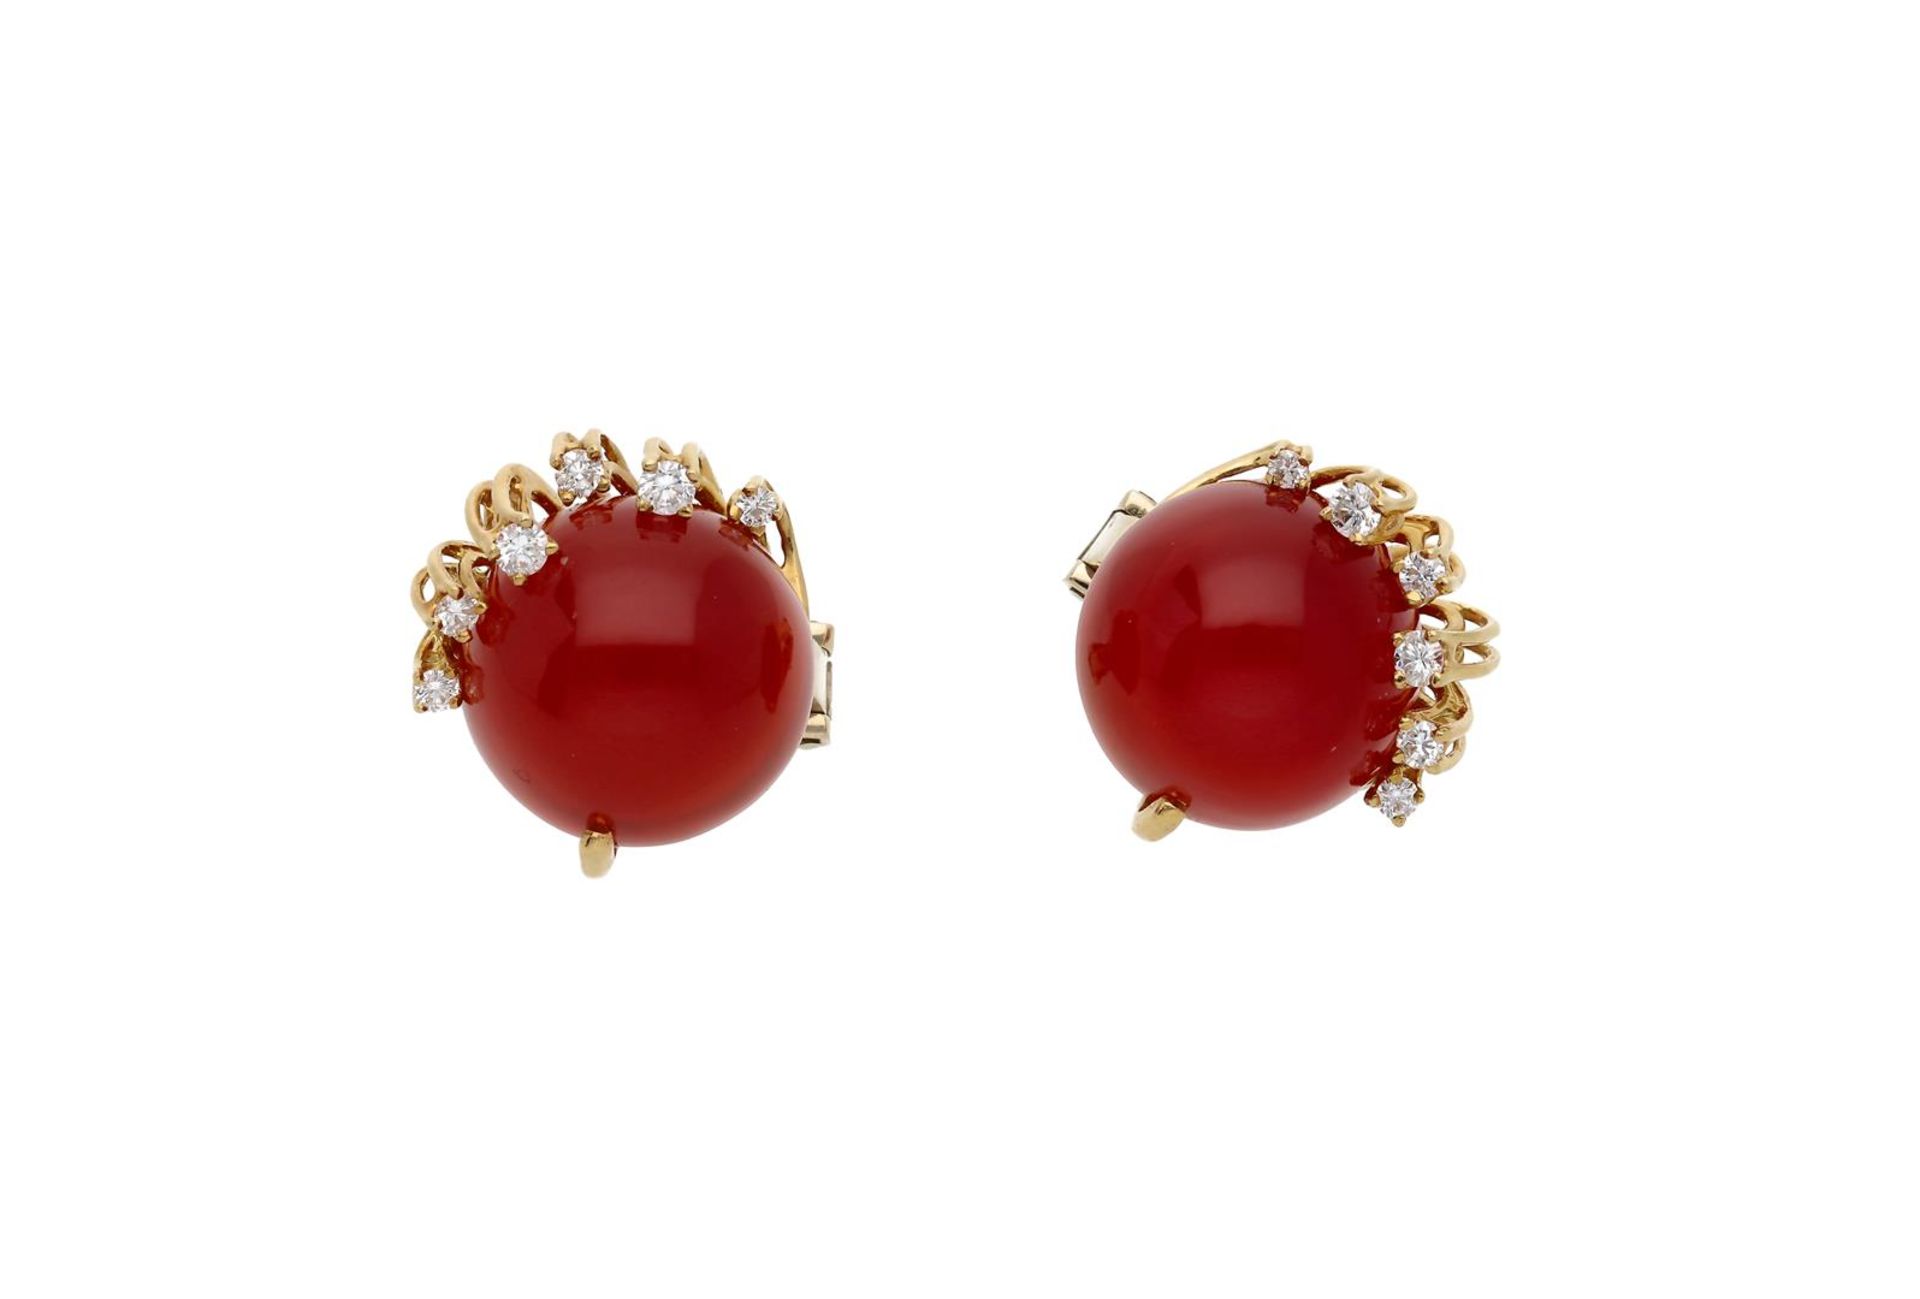 A pair of 18-kt earrings set with a carnelian cabochon with a diameter of approx. 15.5 mm, and brill